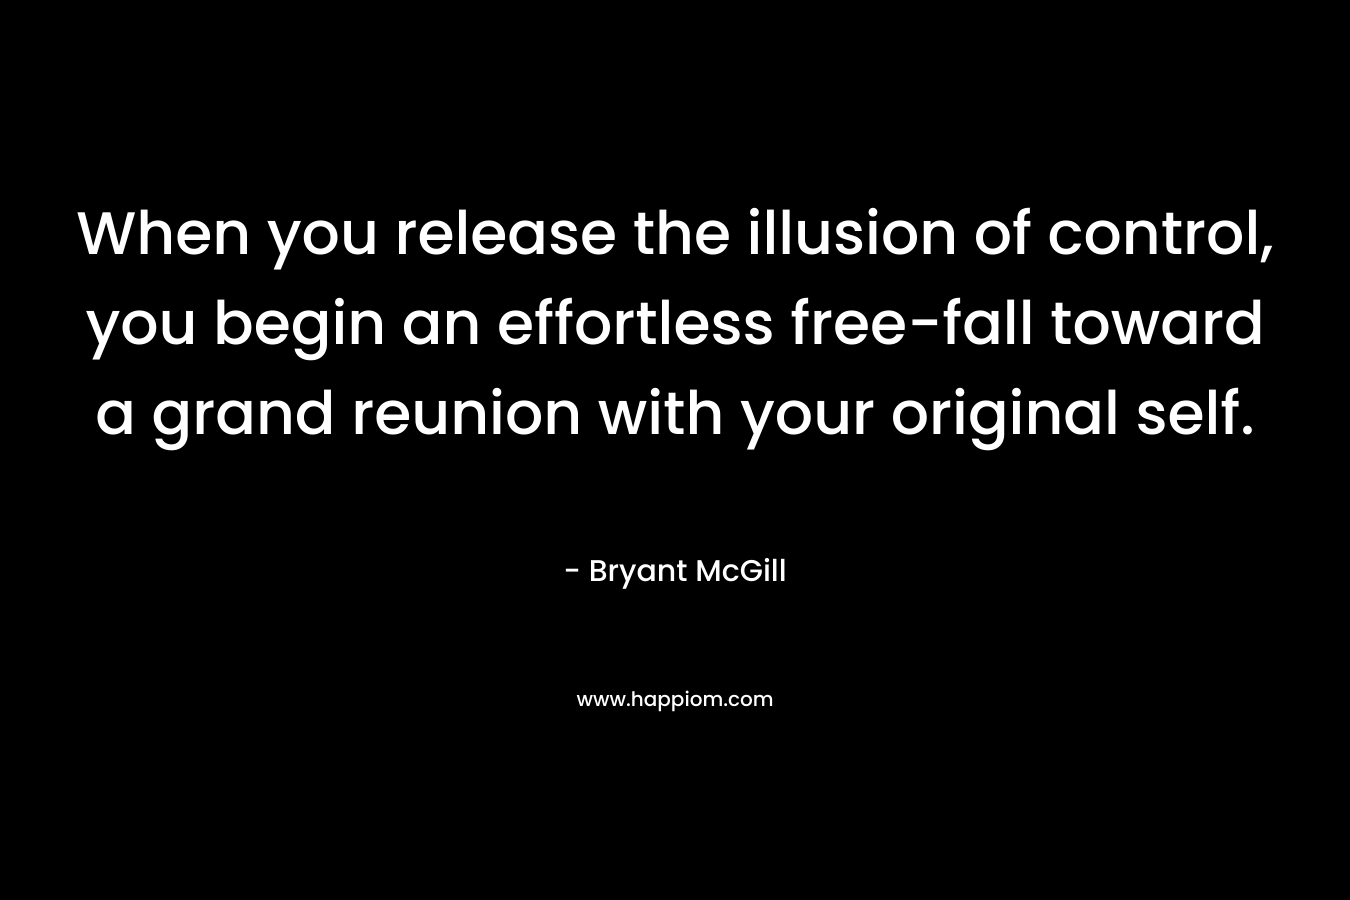 When you release the illusion of control, you begin an effortless free-fall toward a grand reunion with your original self.